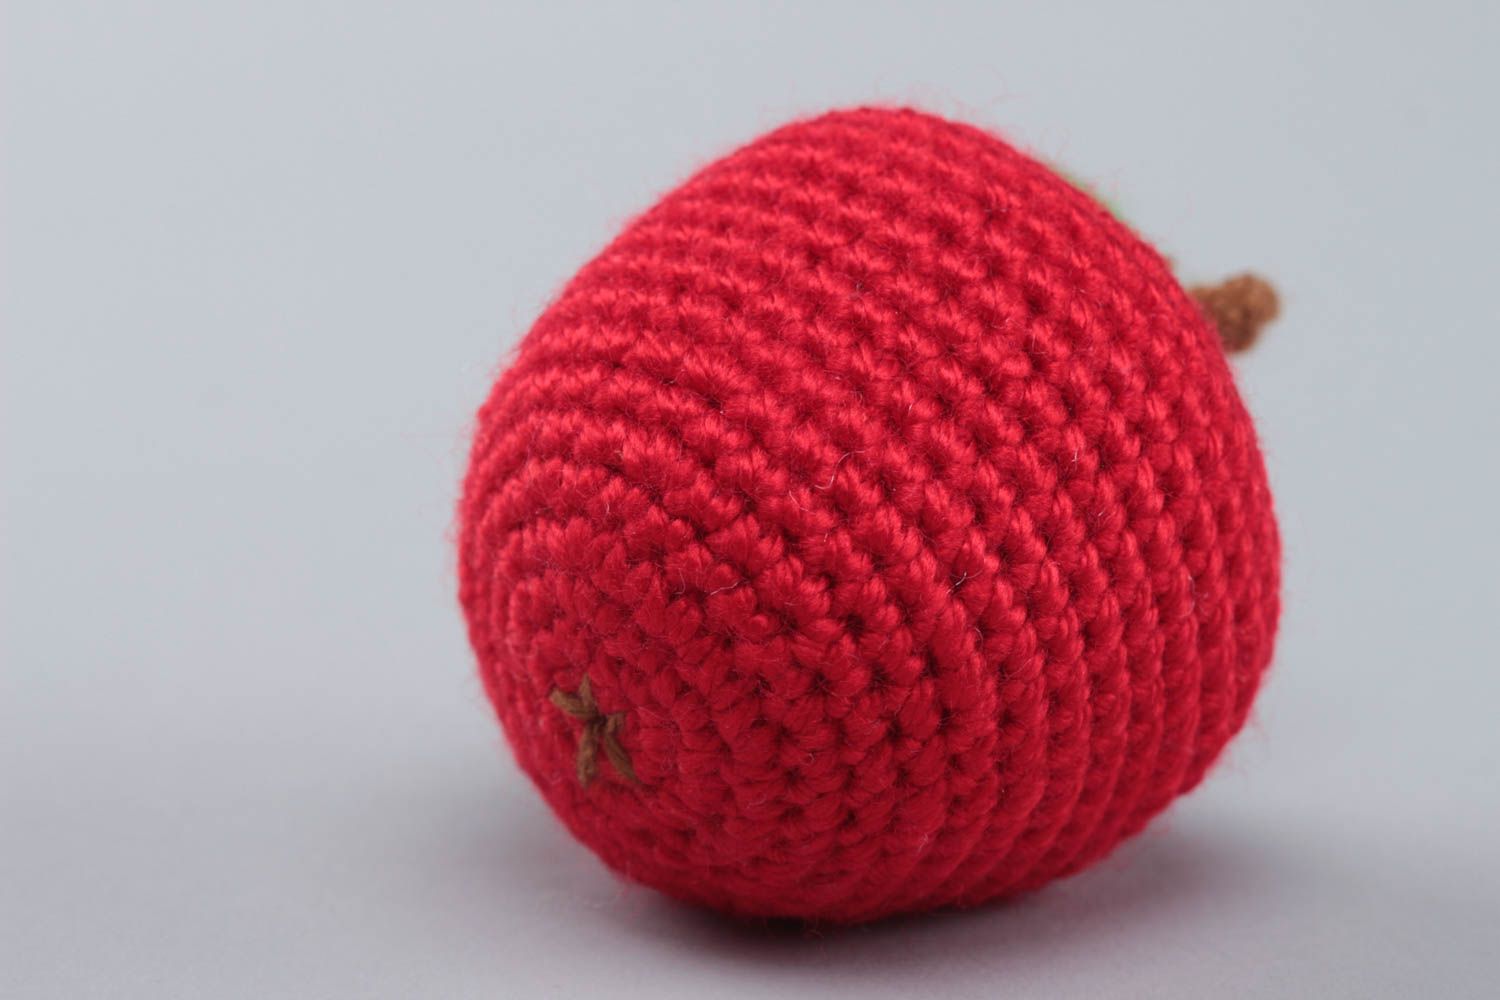 Handmade small crochet soft toy red apple for kids and interior decoration photo 4